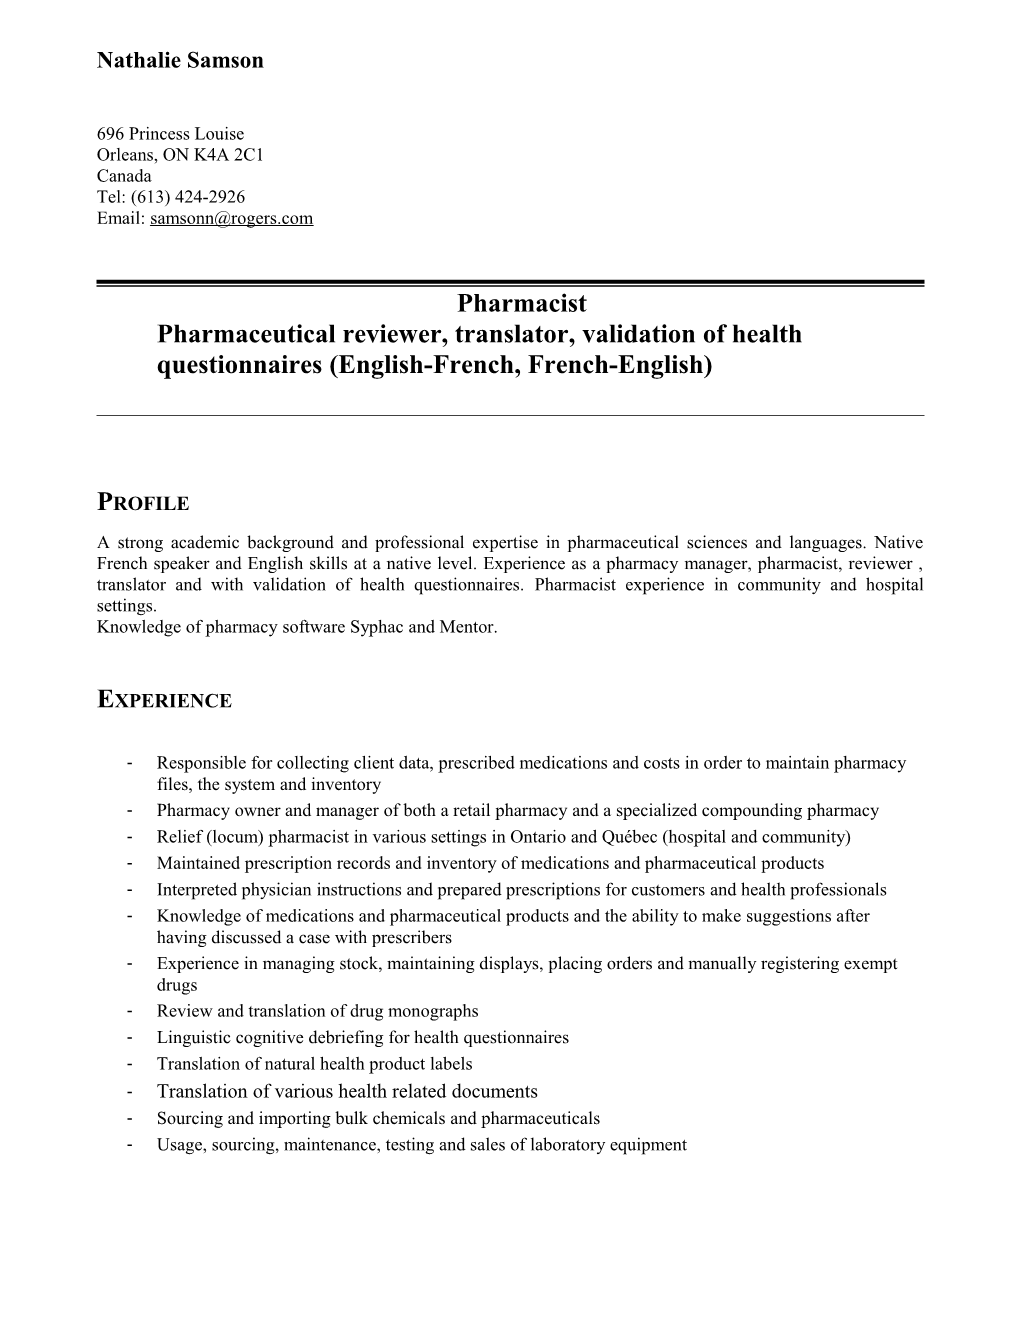 Pharmaceutical Reviewer, Translator, Validation of Health Questionnaires (English-French